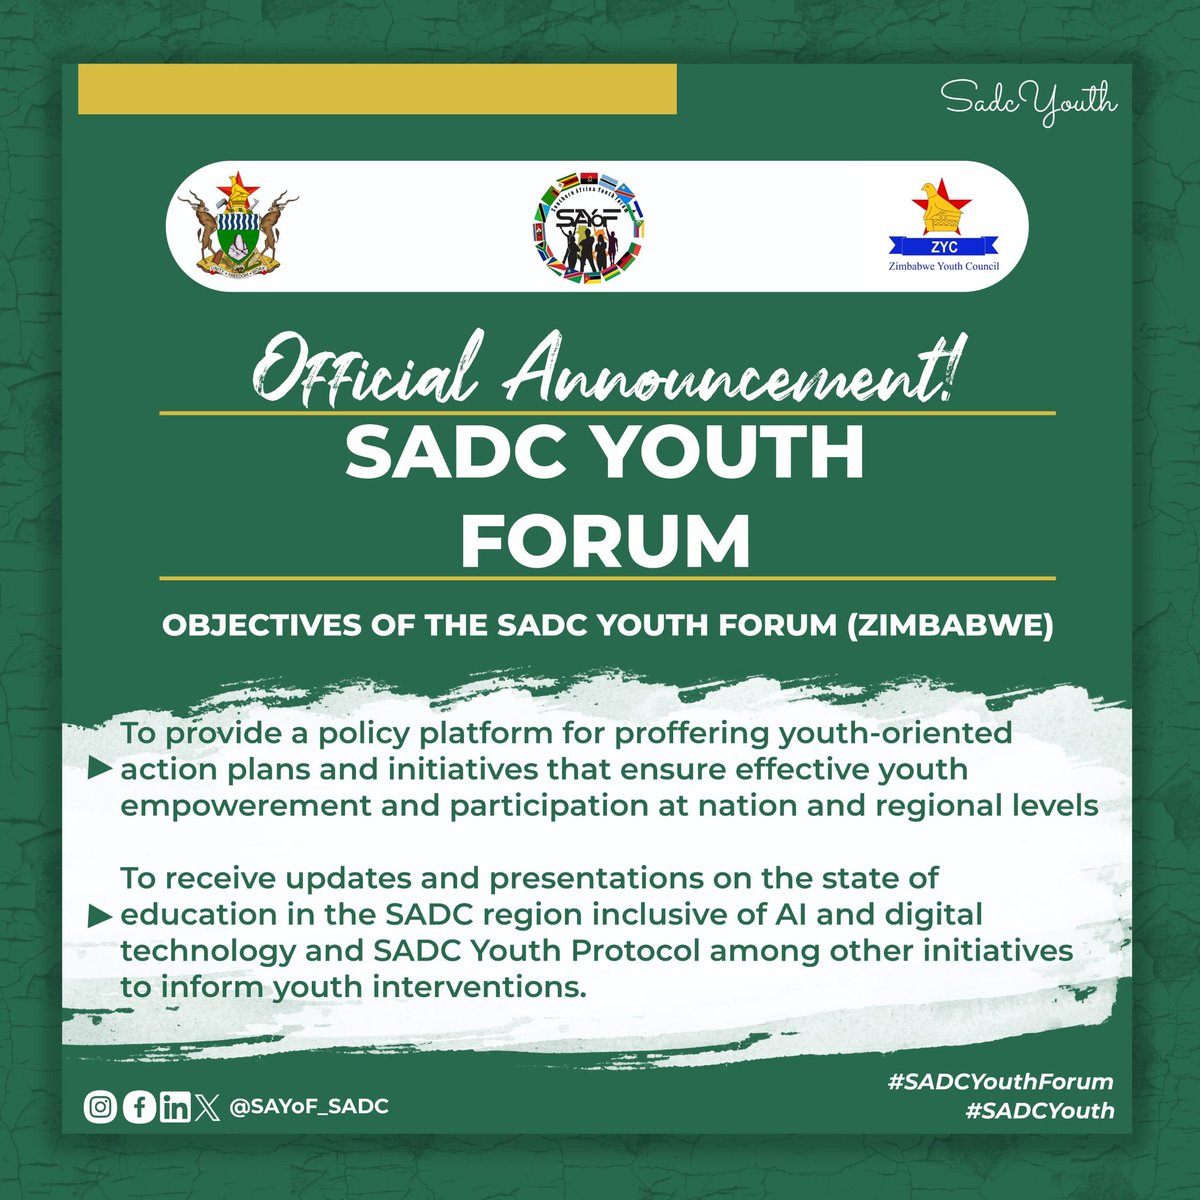 📌The Objectives of the SADC Youth Forum •To provide a policy platform for proffering youth-oriented action plans and initiatives that ensure effective youth empowerment and participation at national and regional levels. #SADCYouth #SADCYouthForum